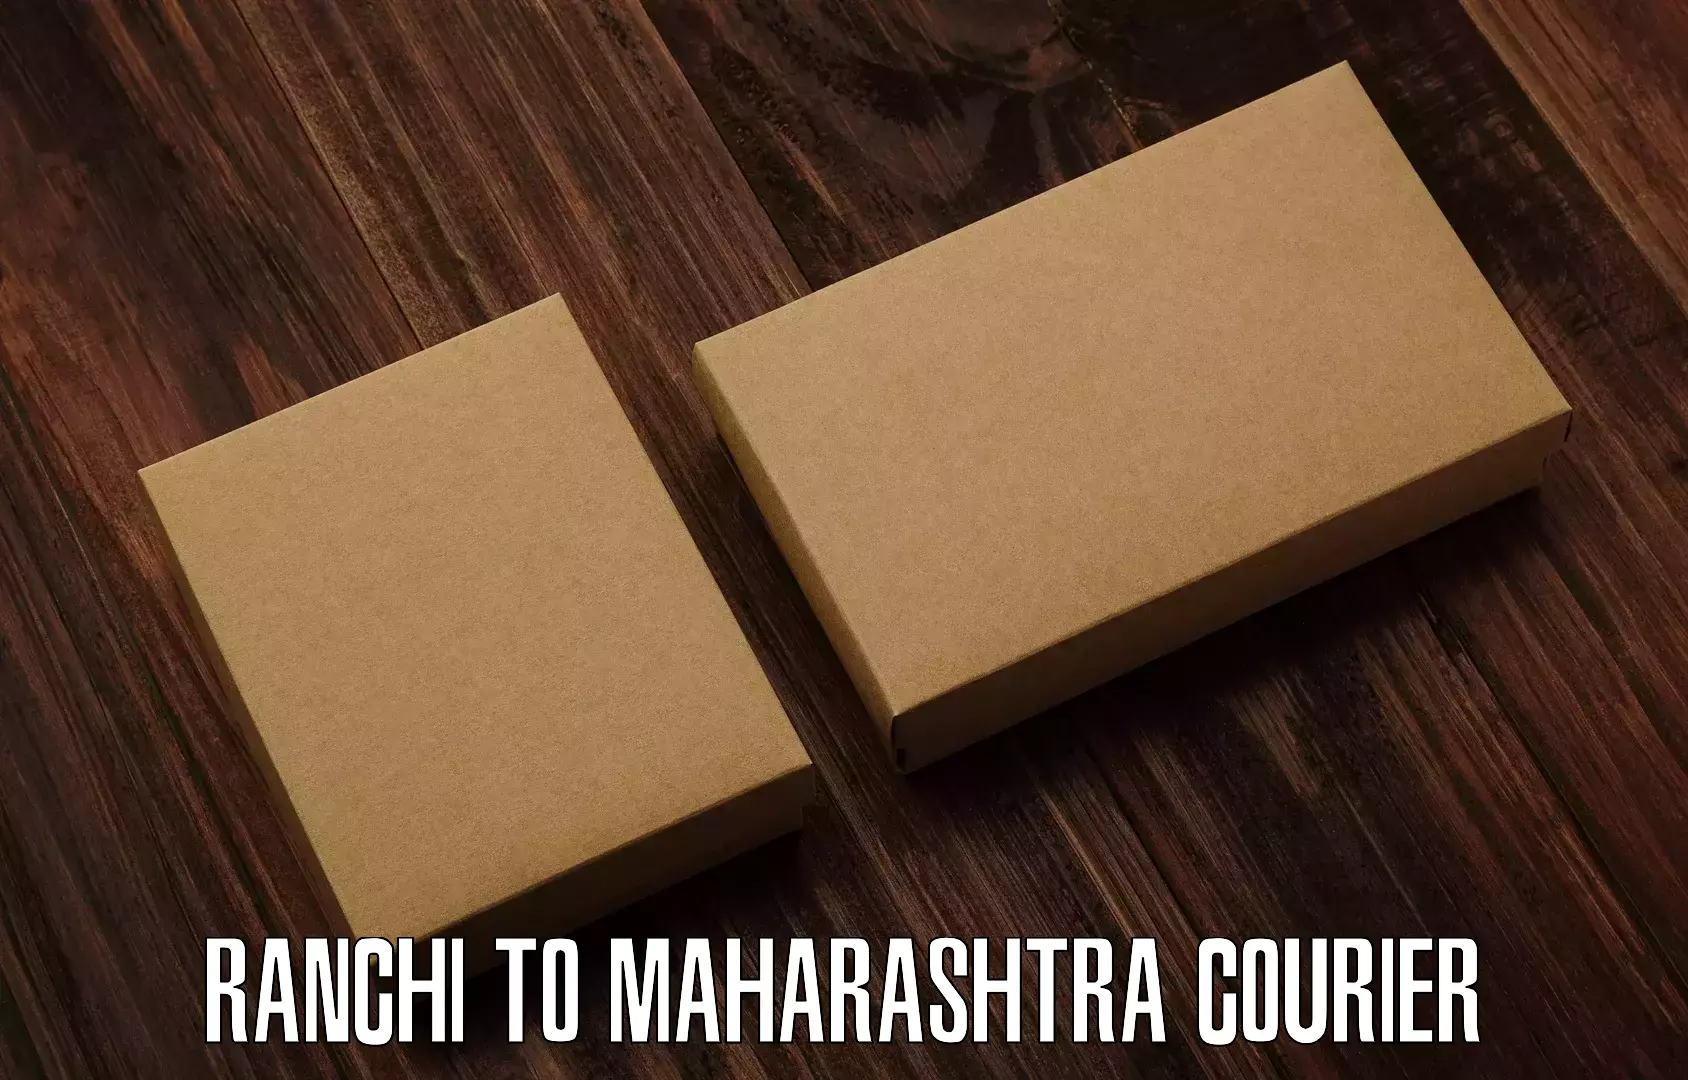 Easy access courier services Ranchi to Tata Institute of Social Sciences Mumbai